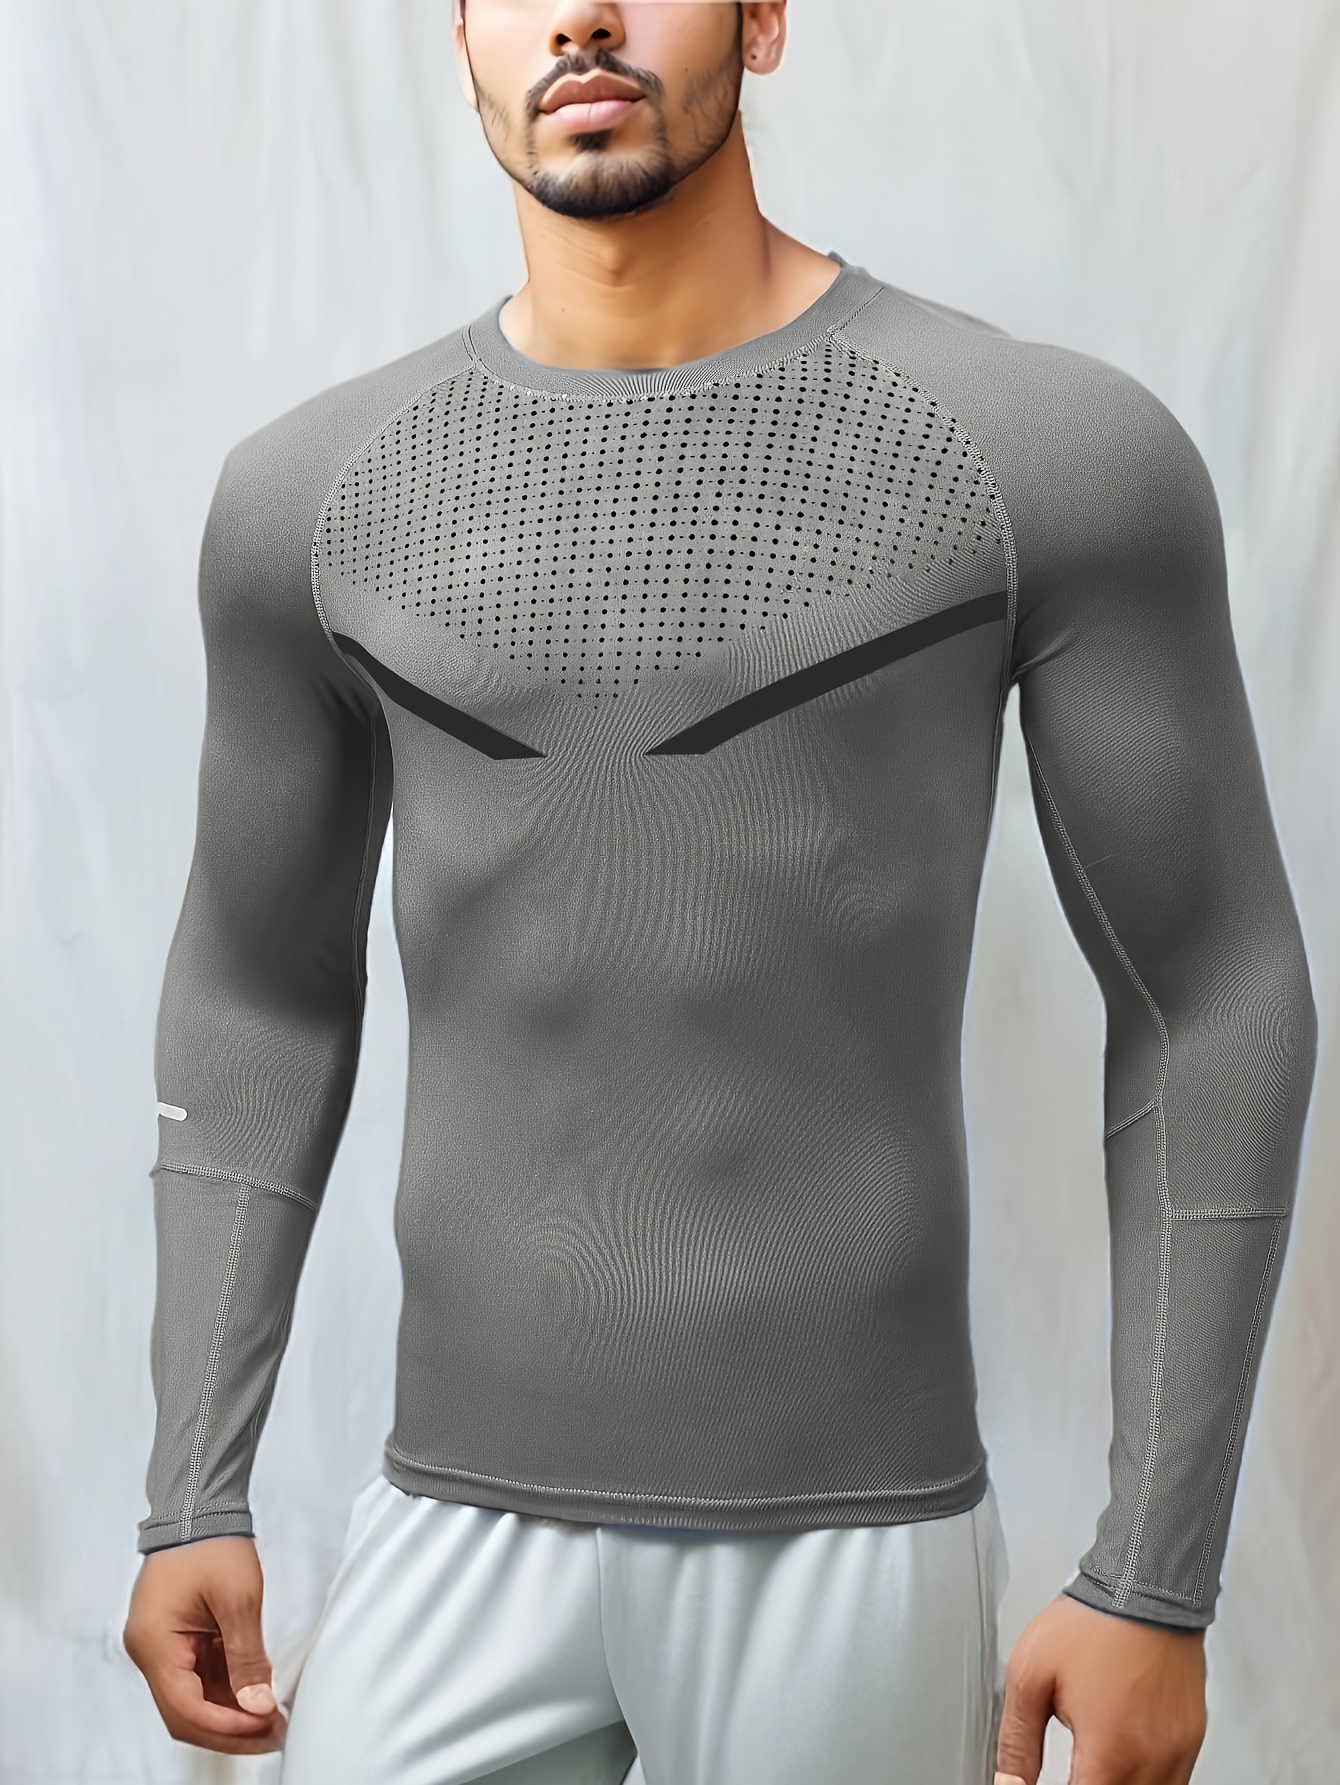 Men's Tall Size Force Lightweight Stretch Grid Base Layer Crewneck Top  Quick Dry Fishing Tops Gear T Shirt for Workout